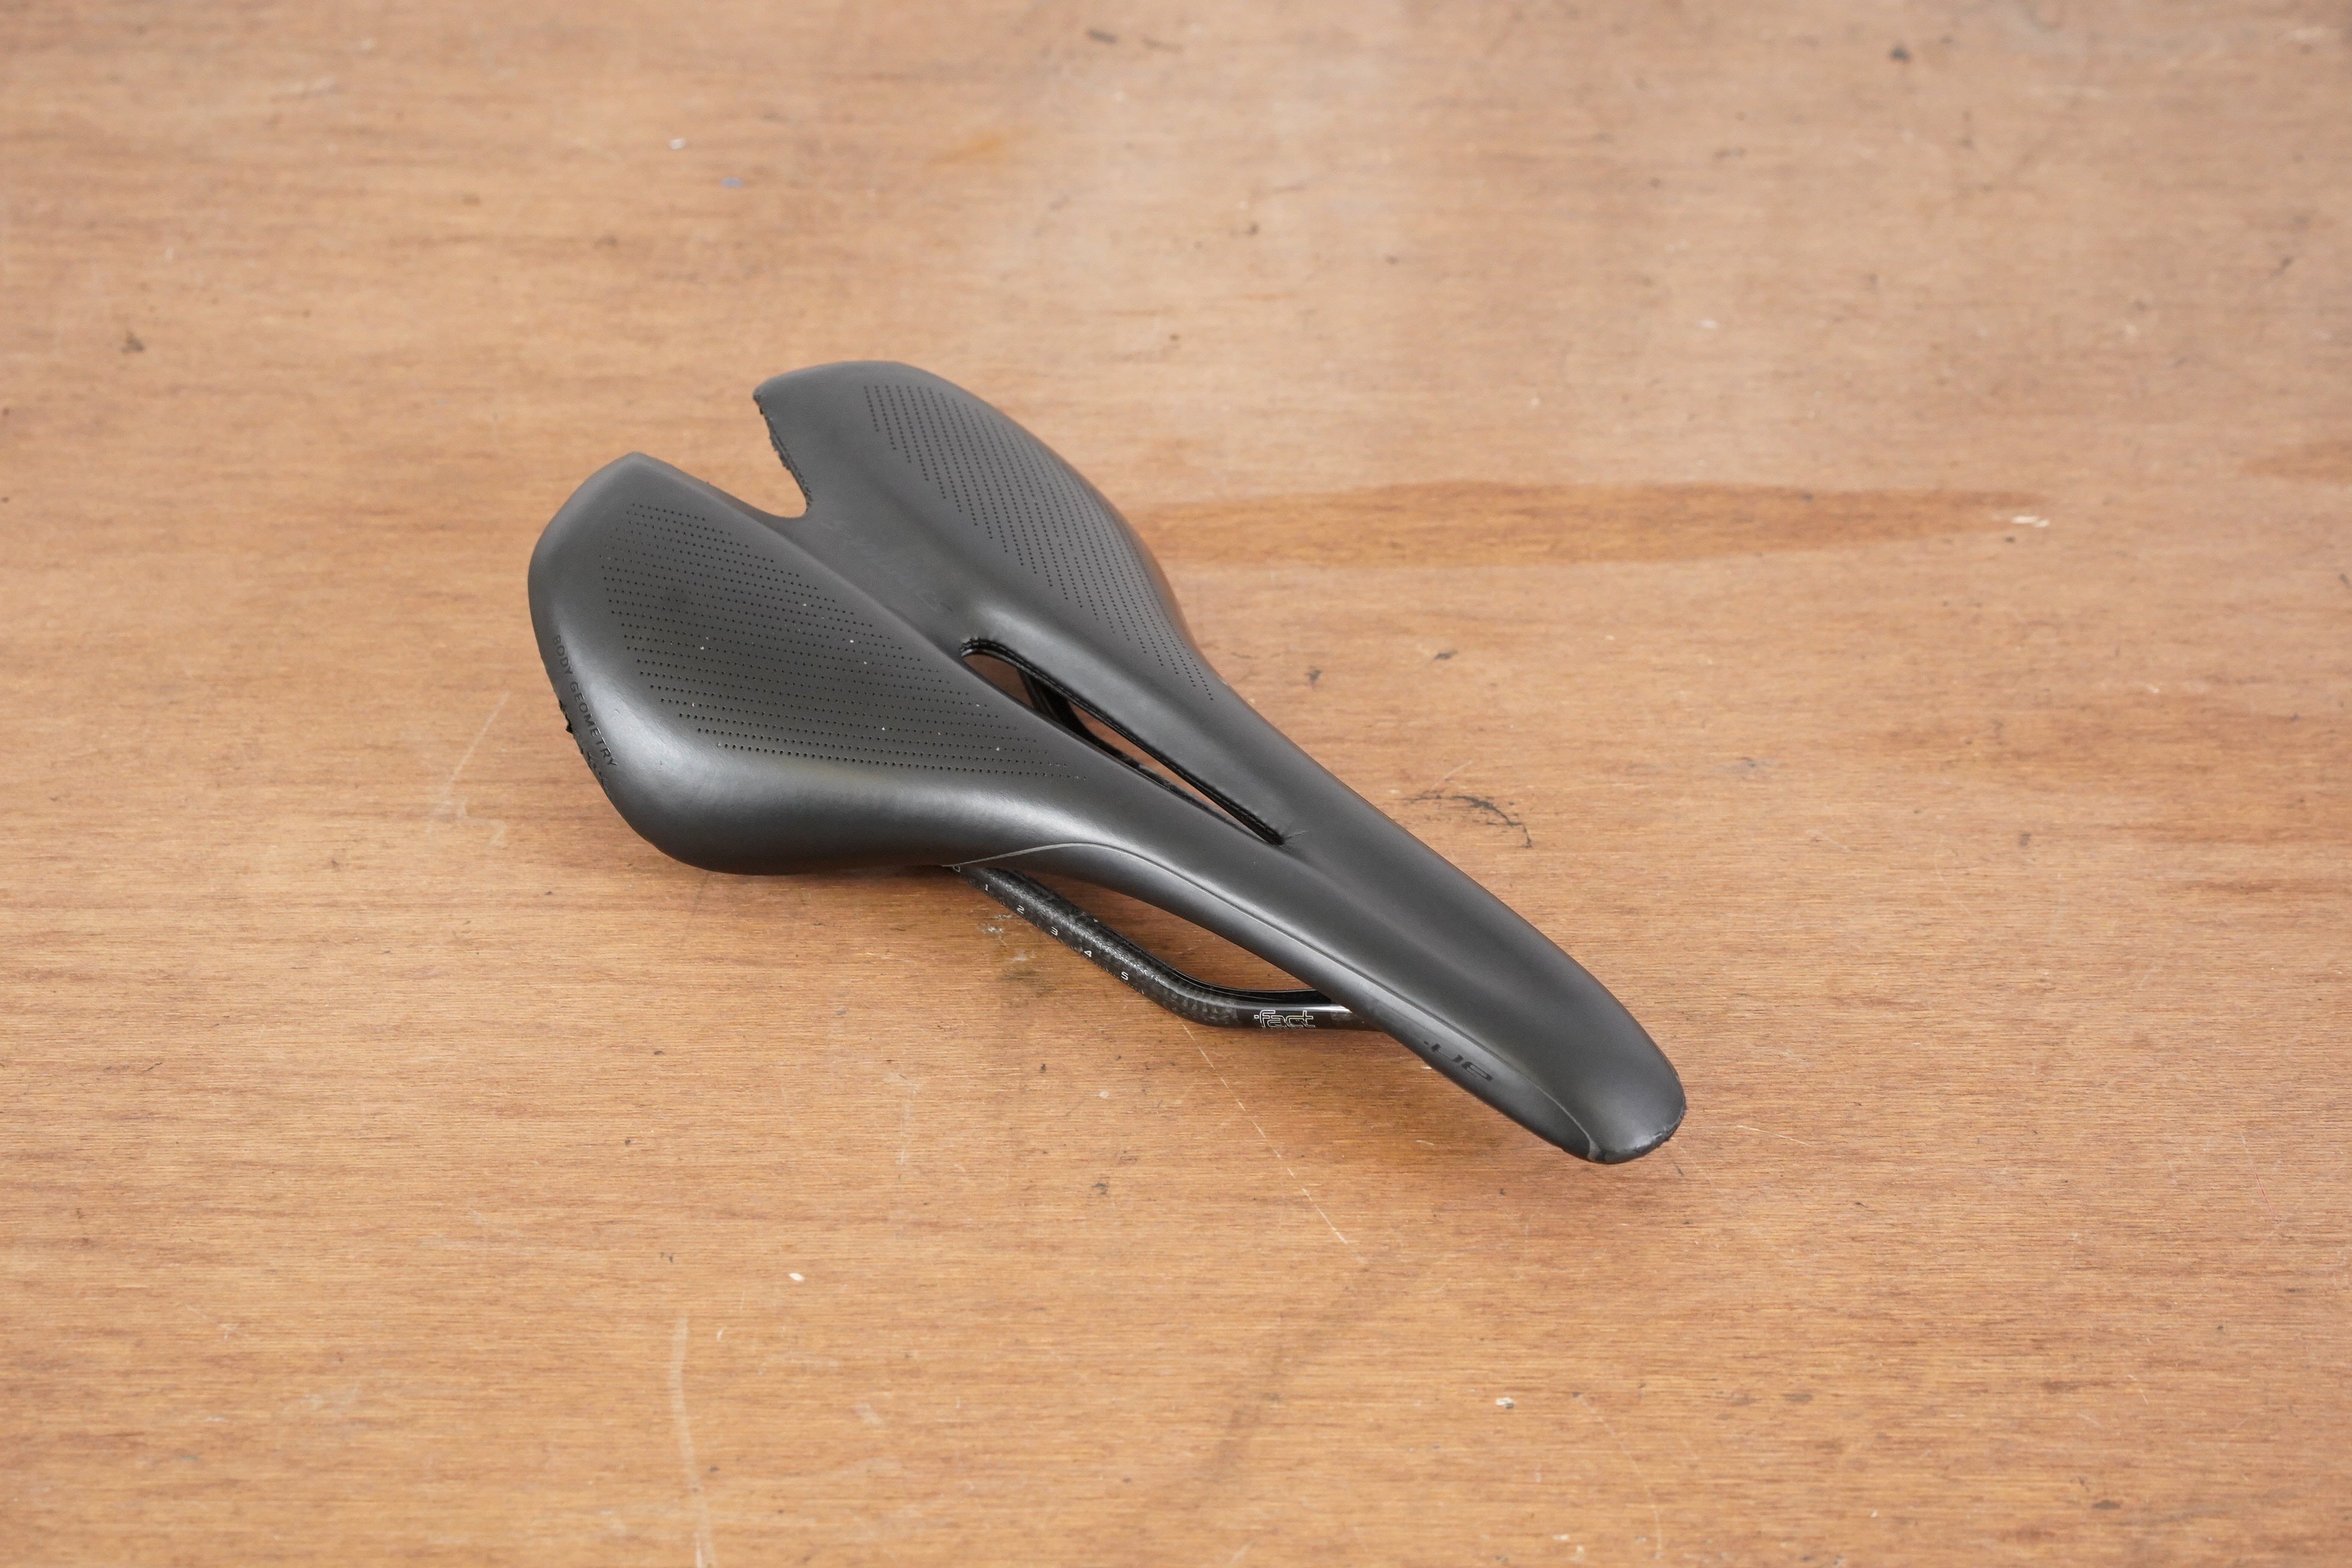 SPECIALIZED スペシャライズド S-WORKS TOUPE CARBON SADDLE サドル